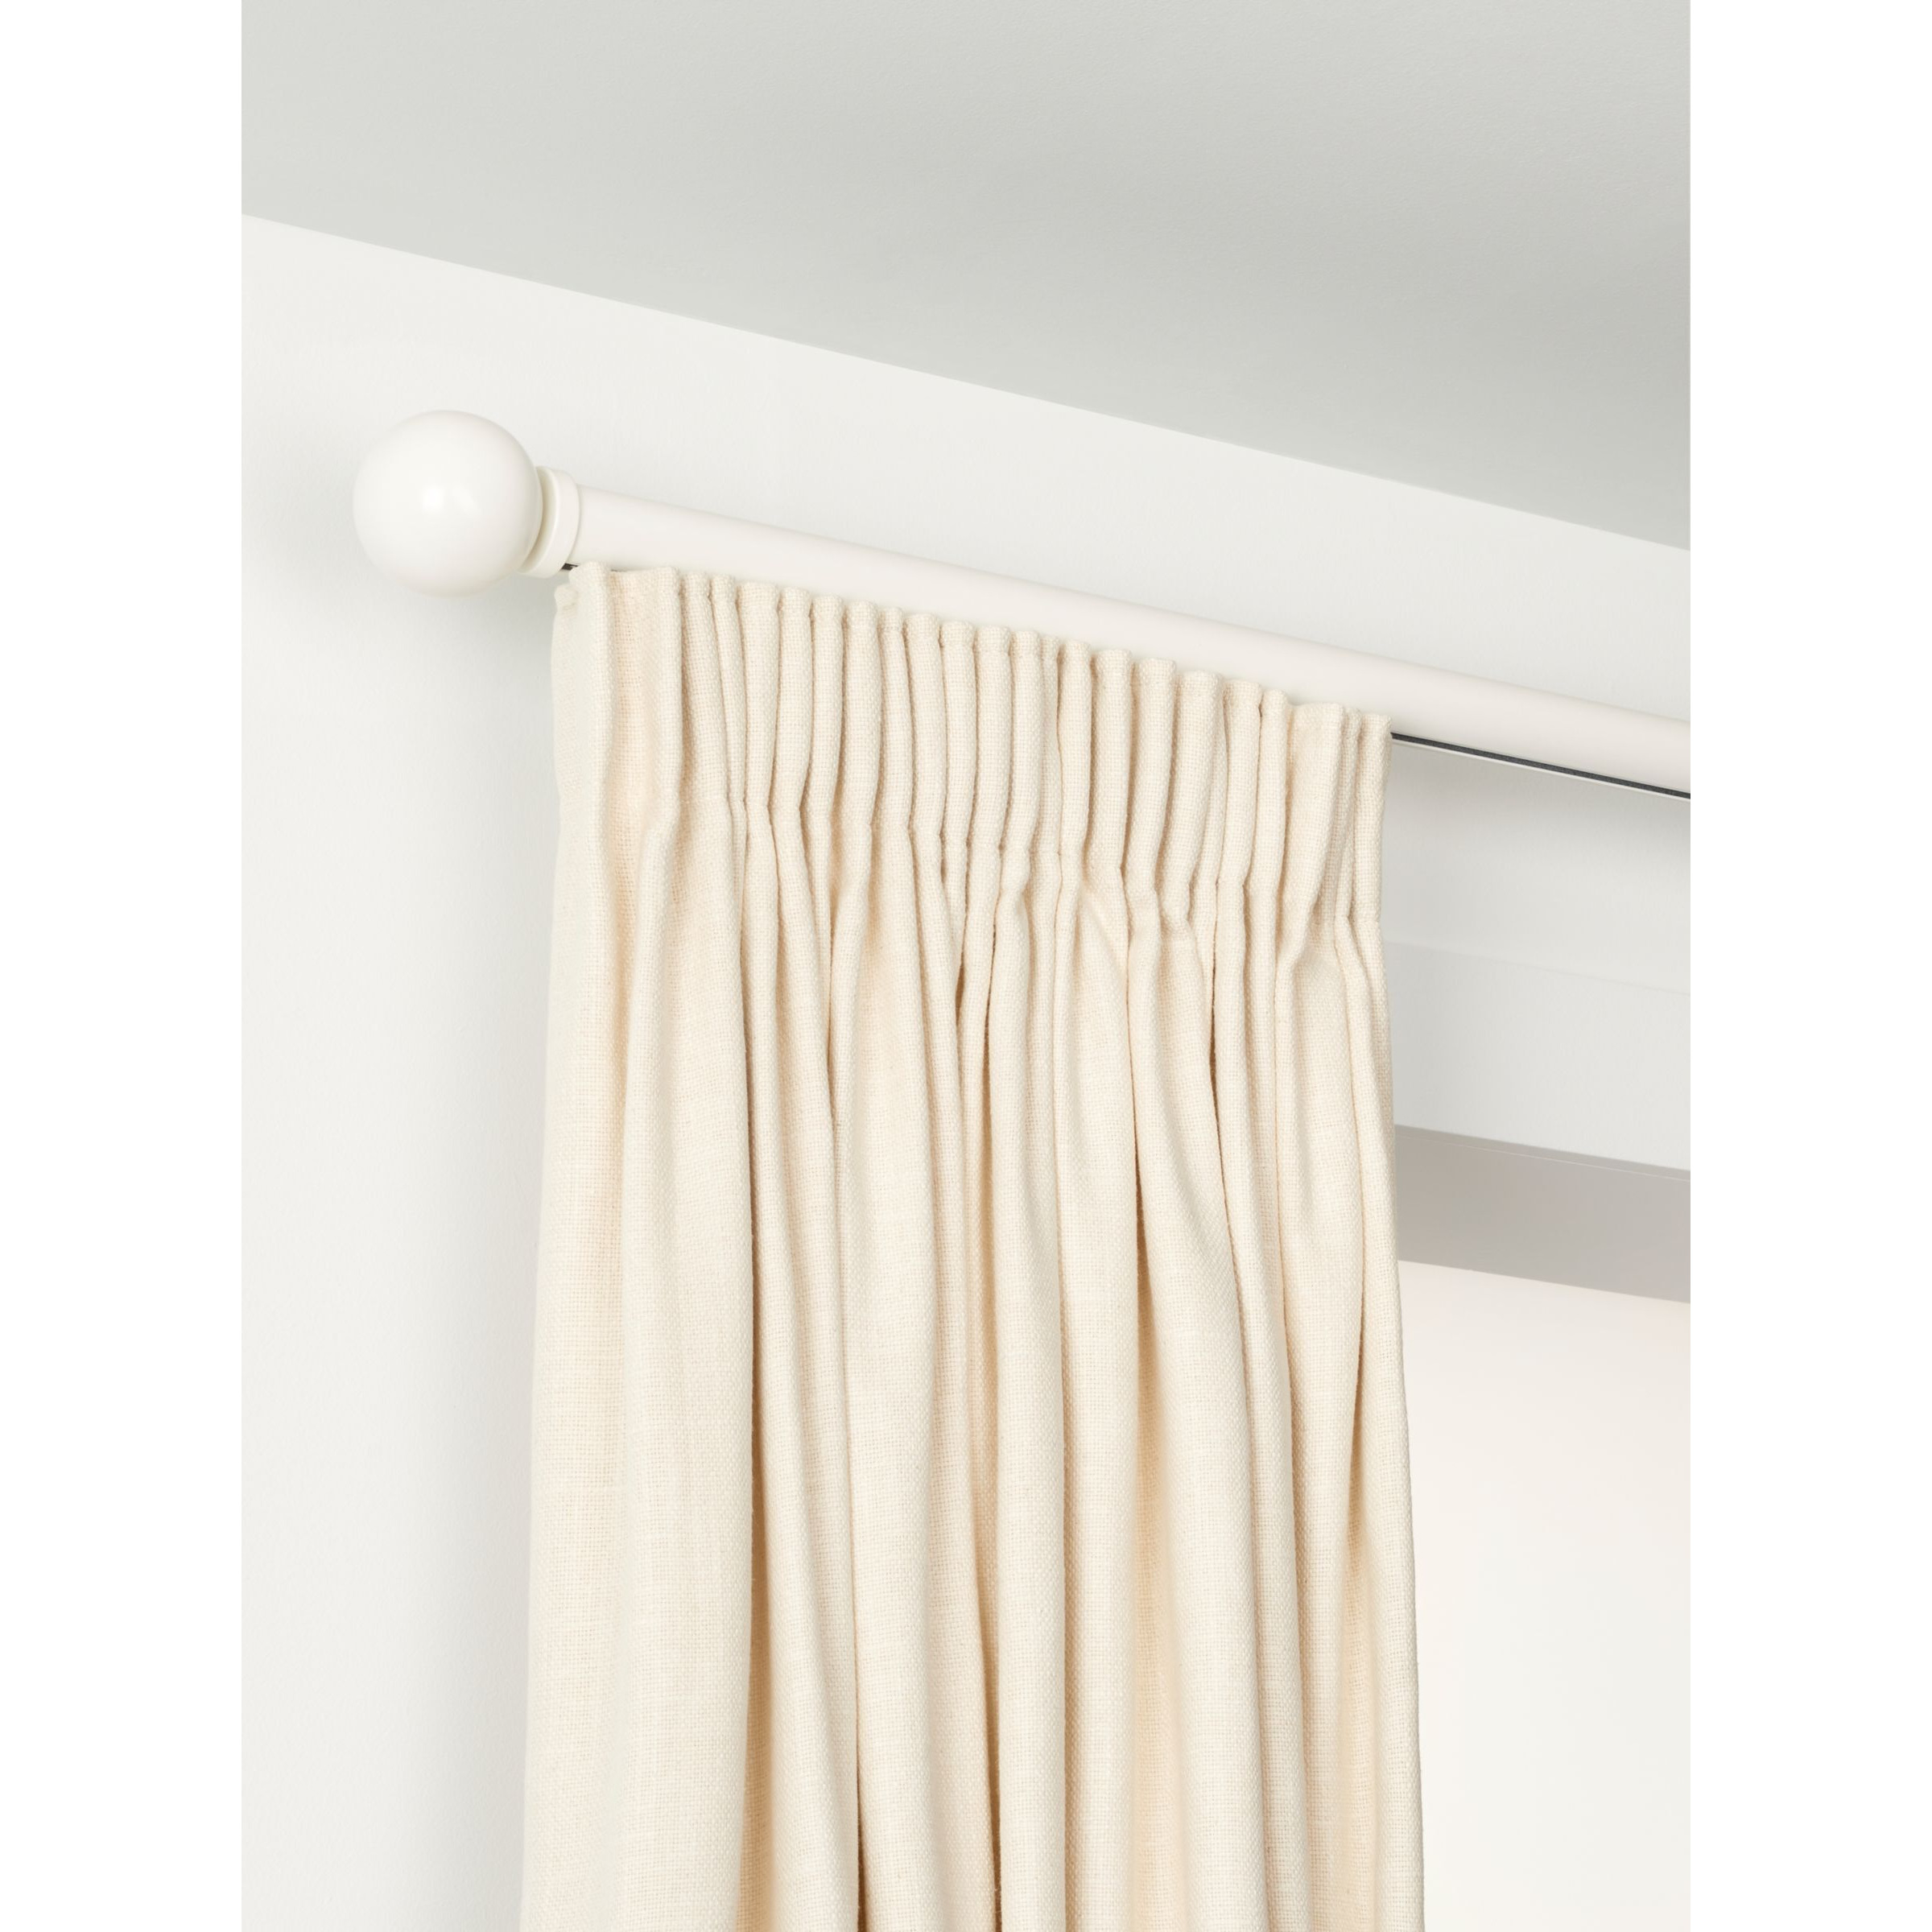 John Lewis Select Gliding Curtain Pole with Ball Finial, Wall Fix, Dia.30mm - image 1